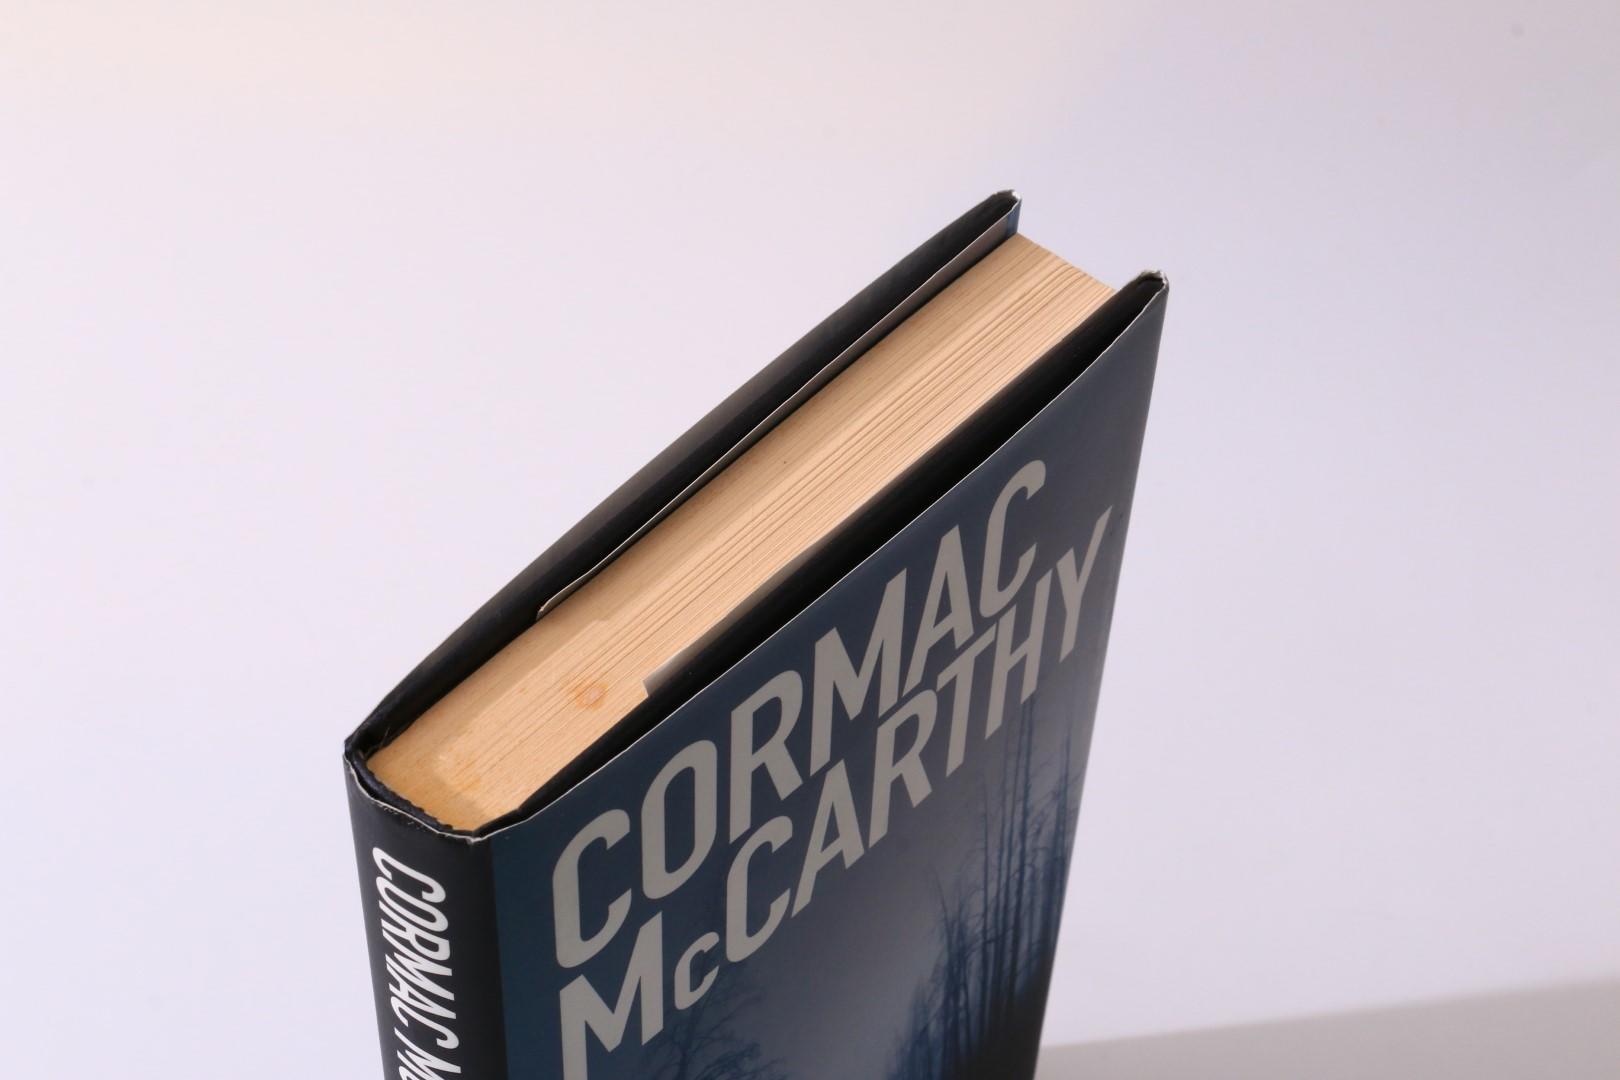 Cormac McCarthy - The Road - Picador, 2006, First Edition.